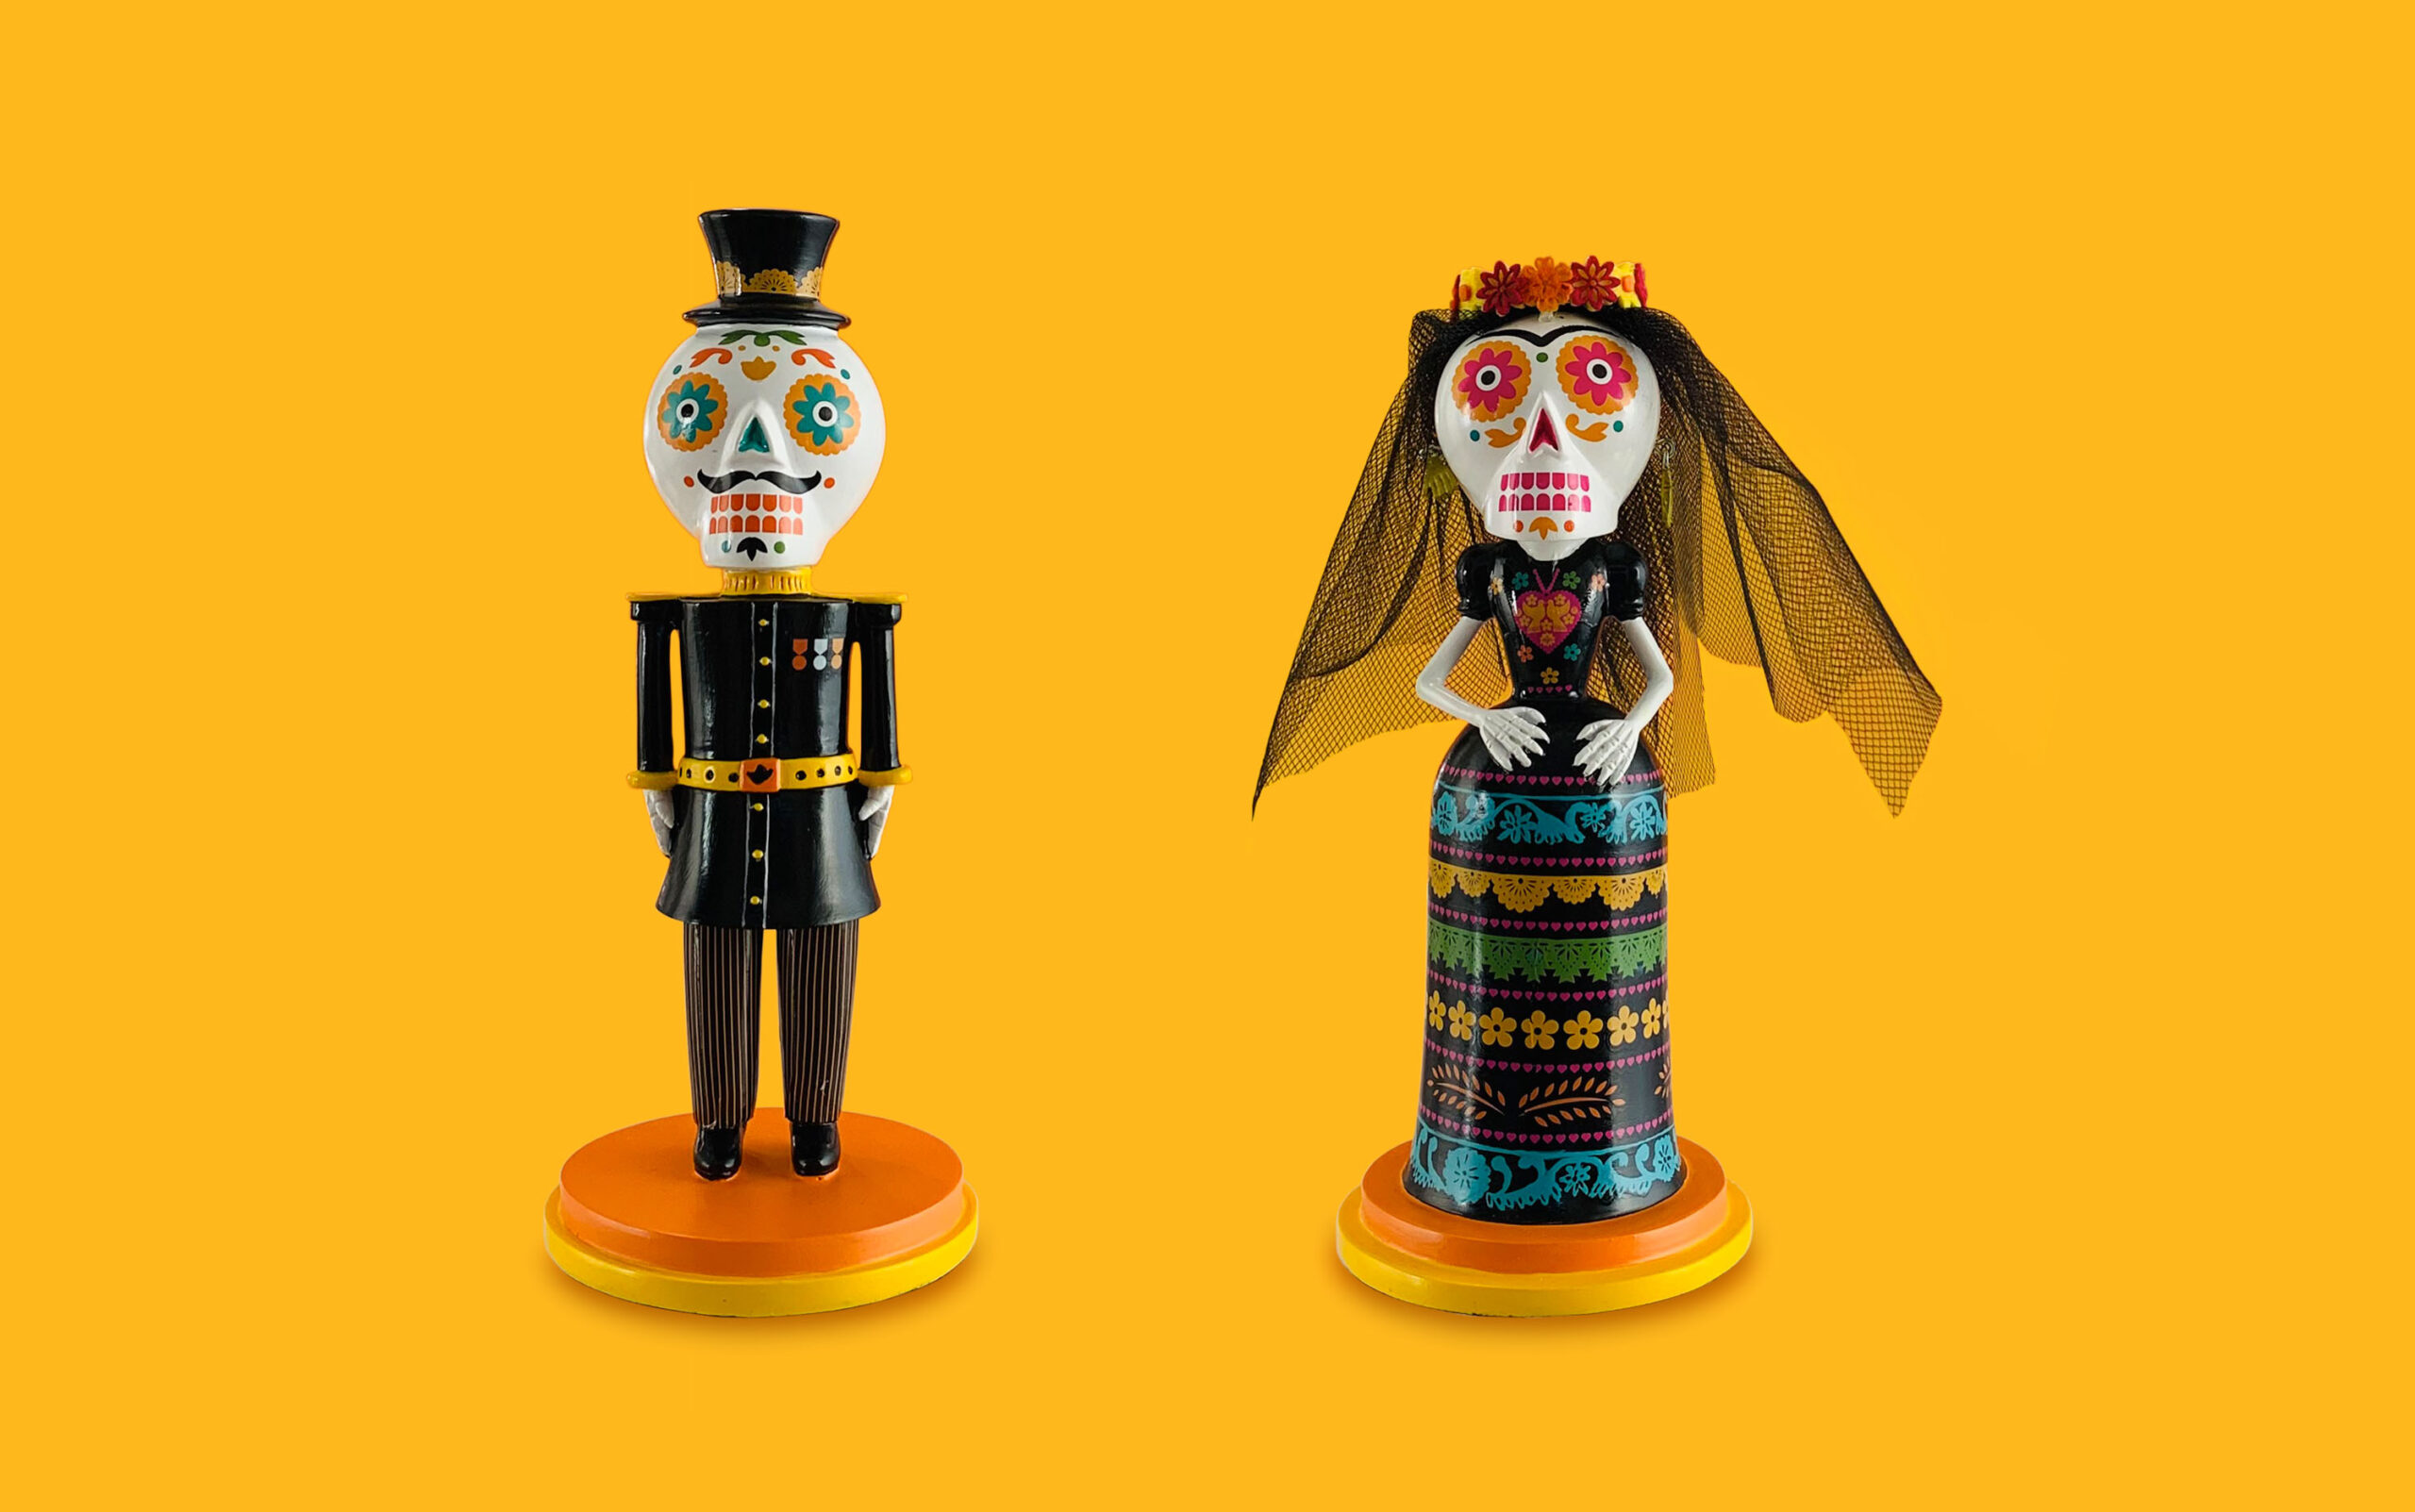 Target Day of the dead figurines